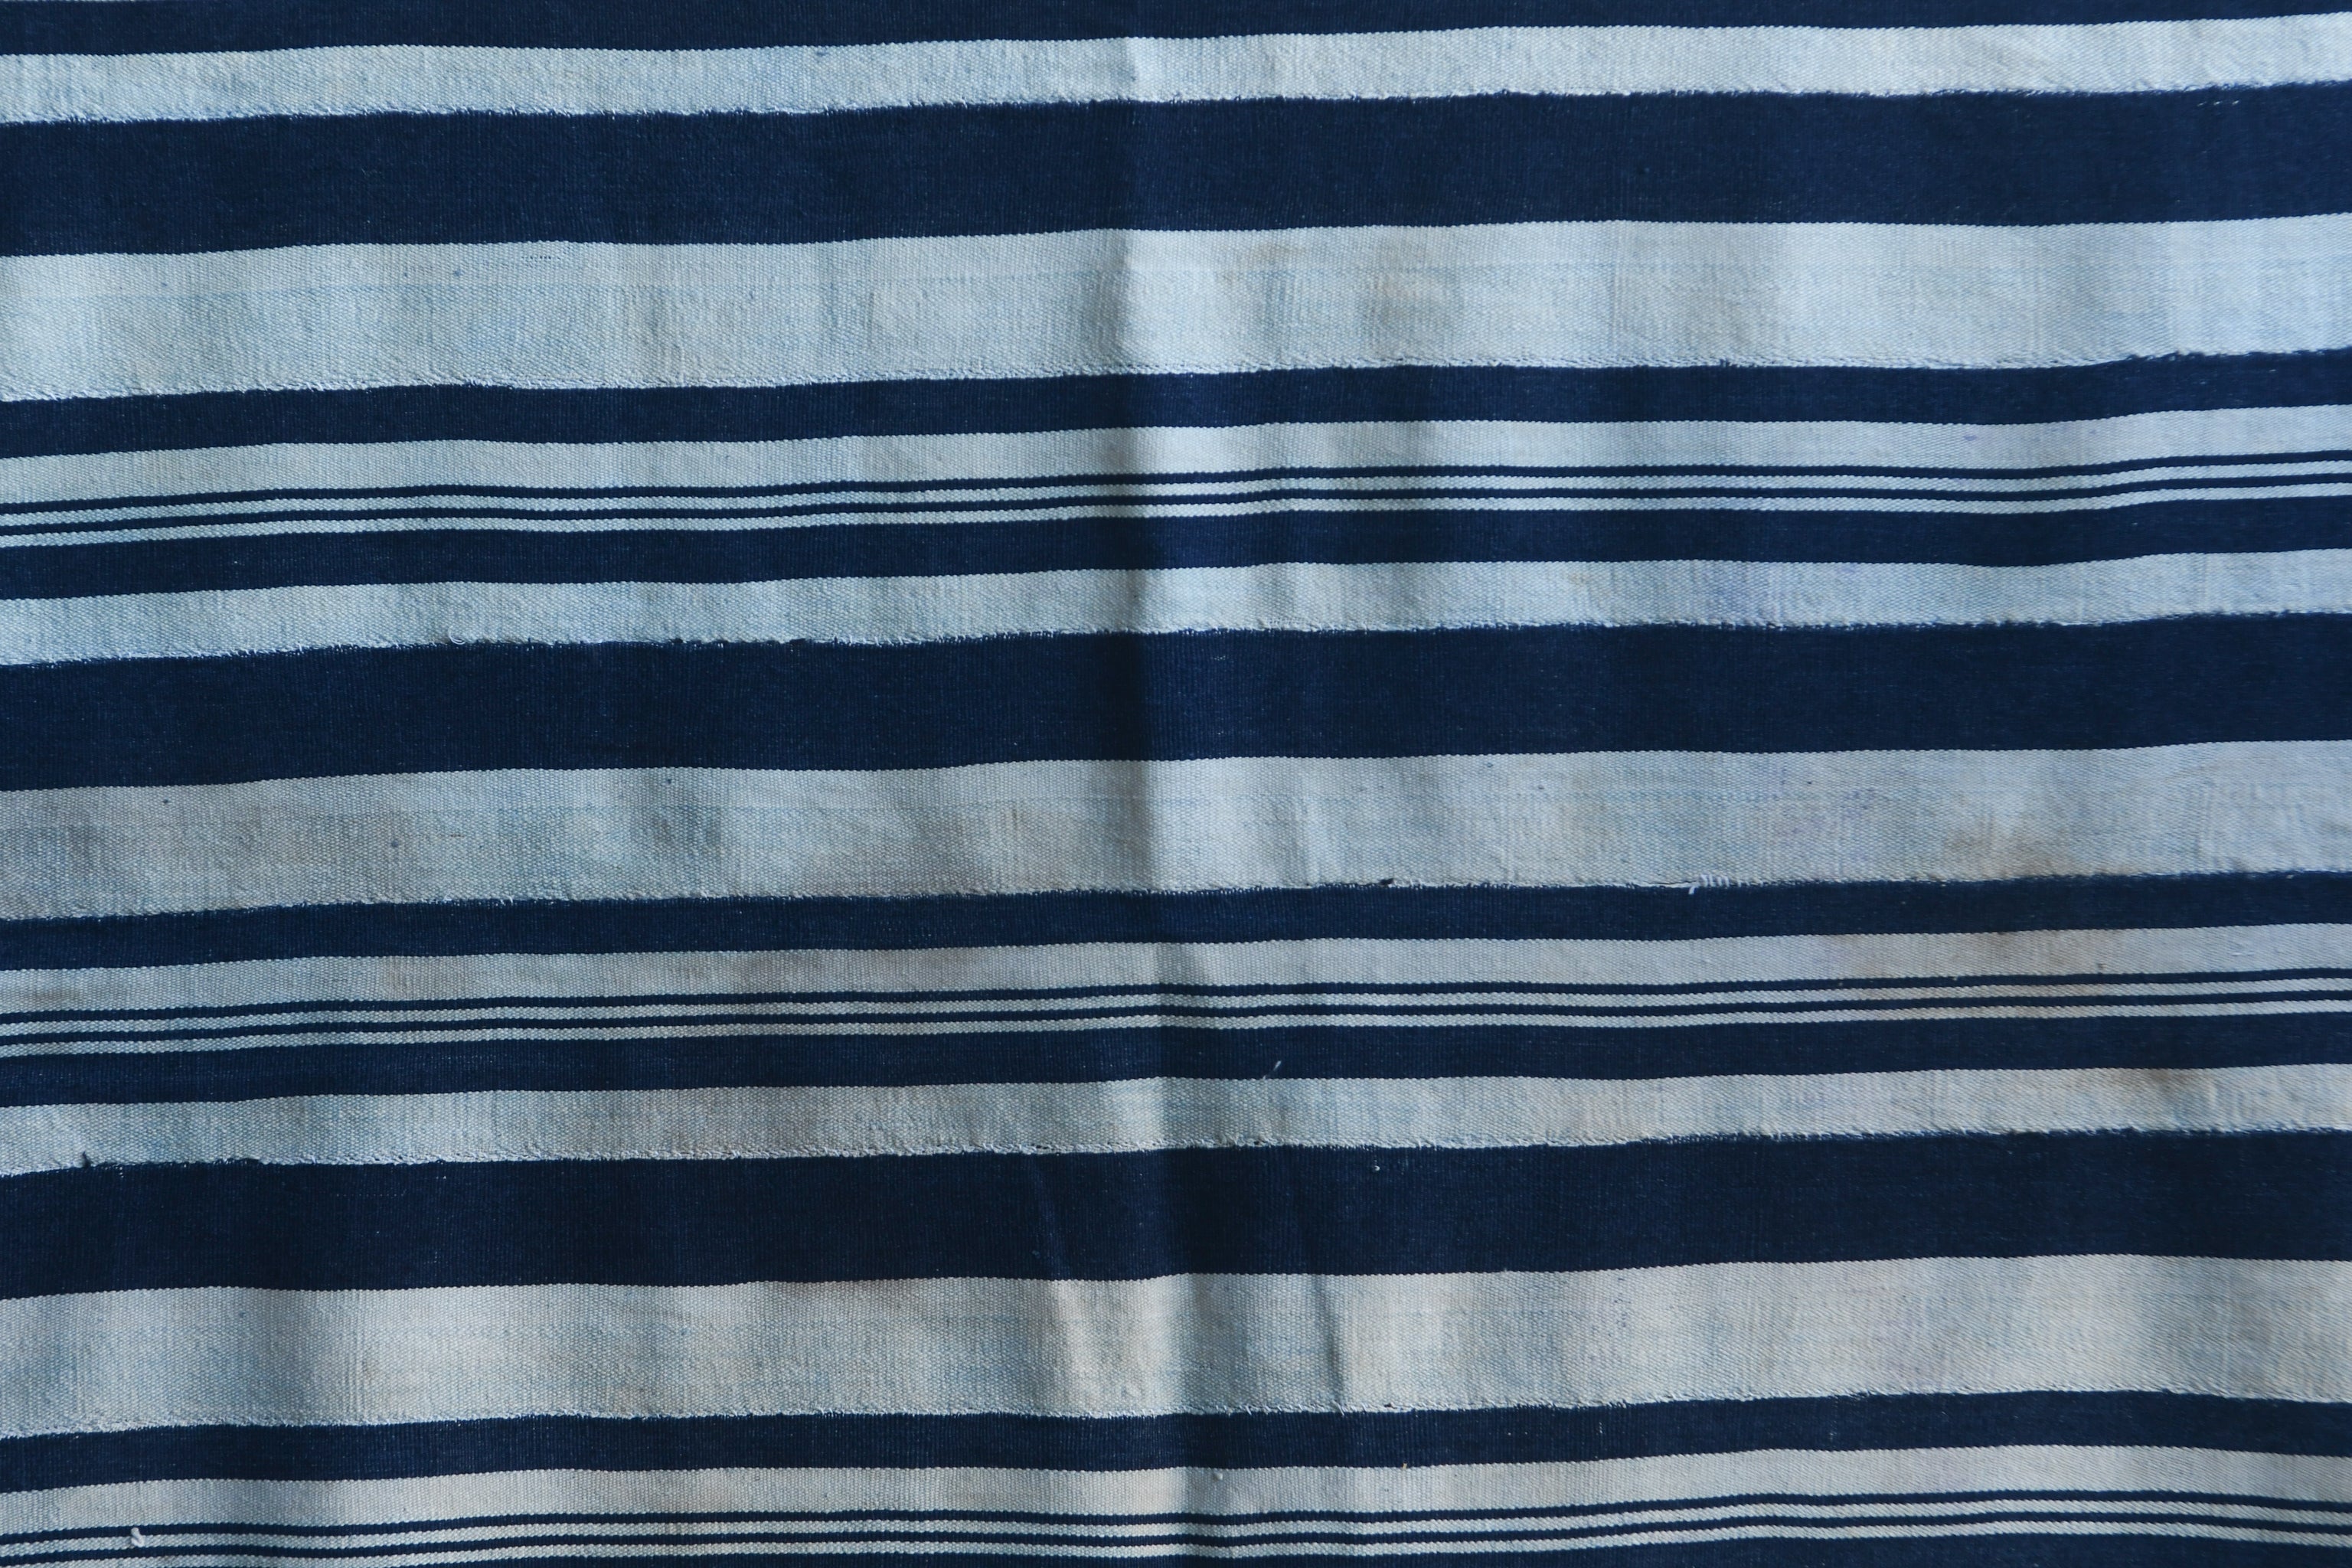 Handcrafted Textiles - Artisan Designed - Handcrafted African Art Textiles - Home Decor - Living Spaces - Mix Colors - Bold Patterns - Traditional Designs - African Culture - This African Indigo textile features a unique tie-dyed design with classic blue and white stripes for a vintage look. Crafted from 100% cotton, the fabric has a breathable, lightweight feel and is perfect for creating stylish garments and home décor with a timeless style. Length: 63 inches Width : 44 inches